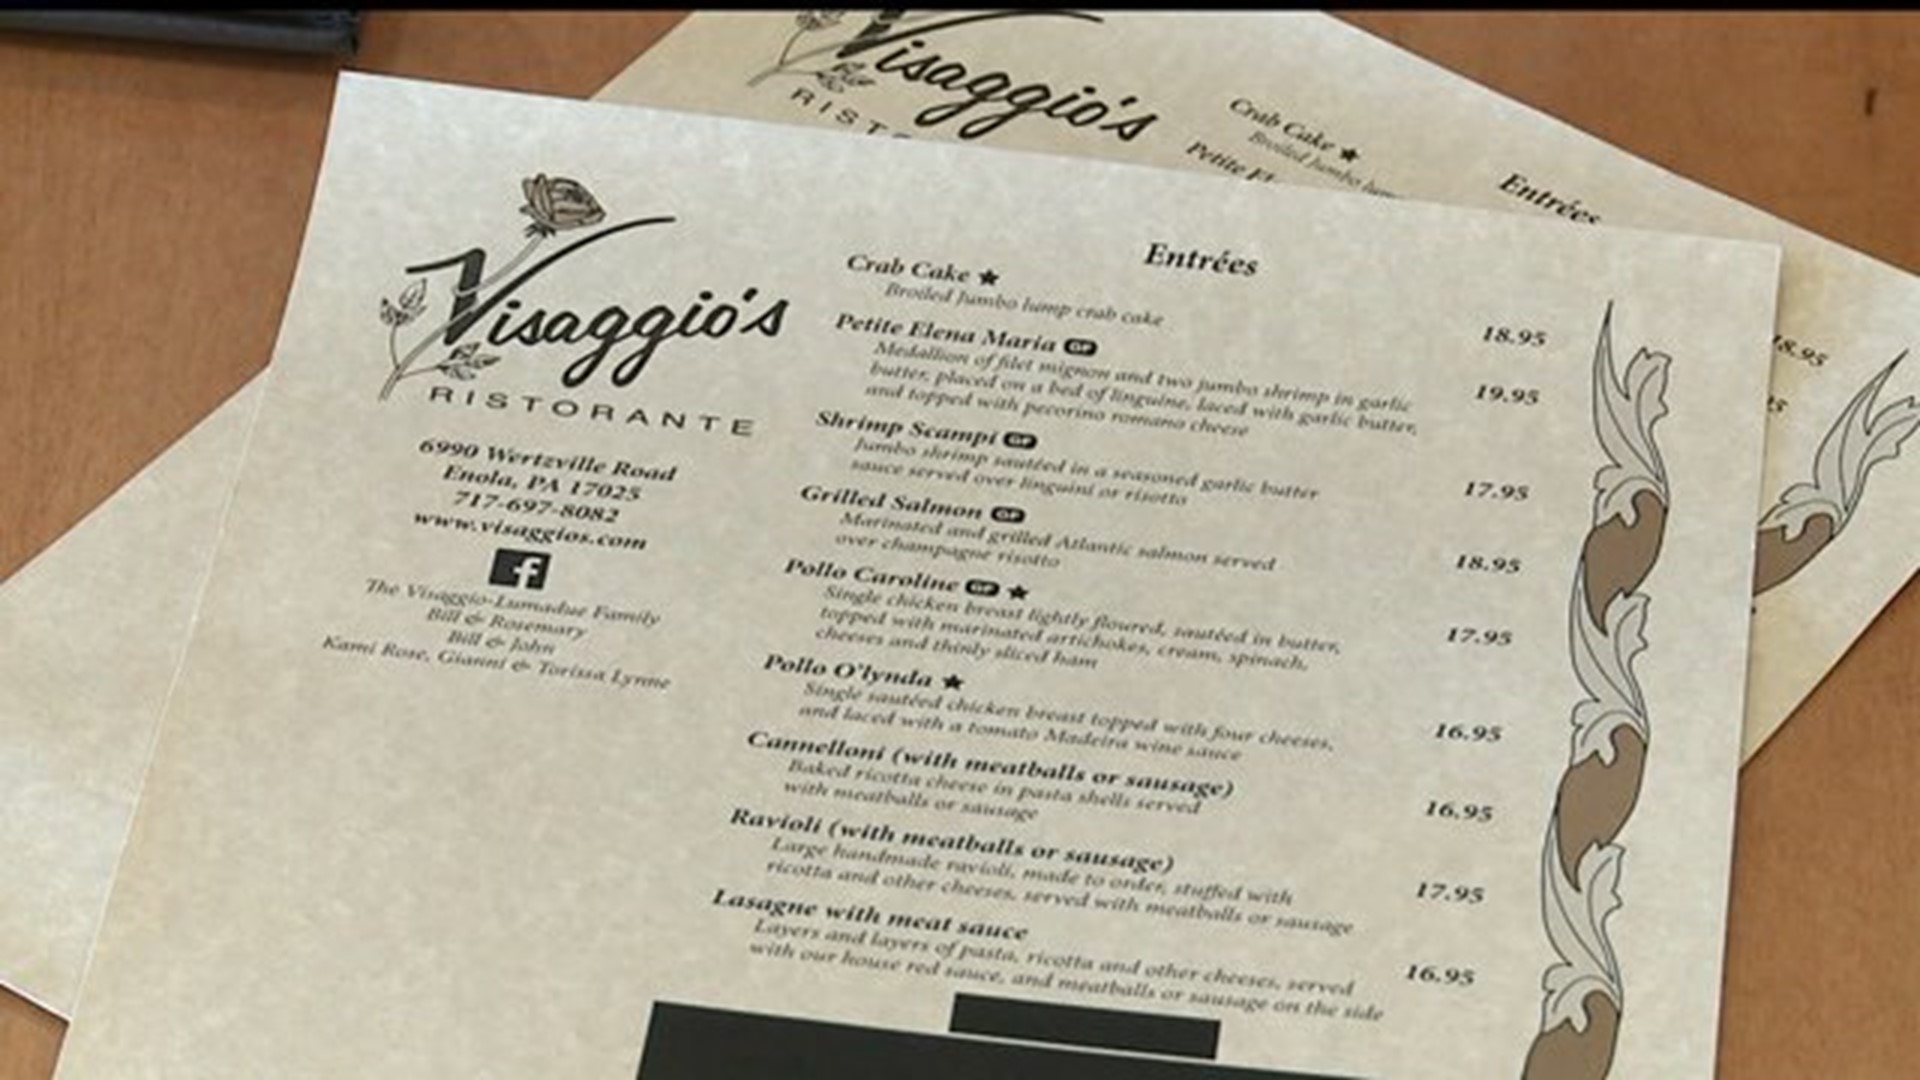 Visaggio`s Reopens One Year After Massive Fire